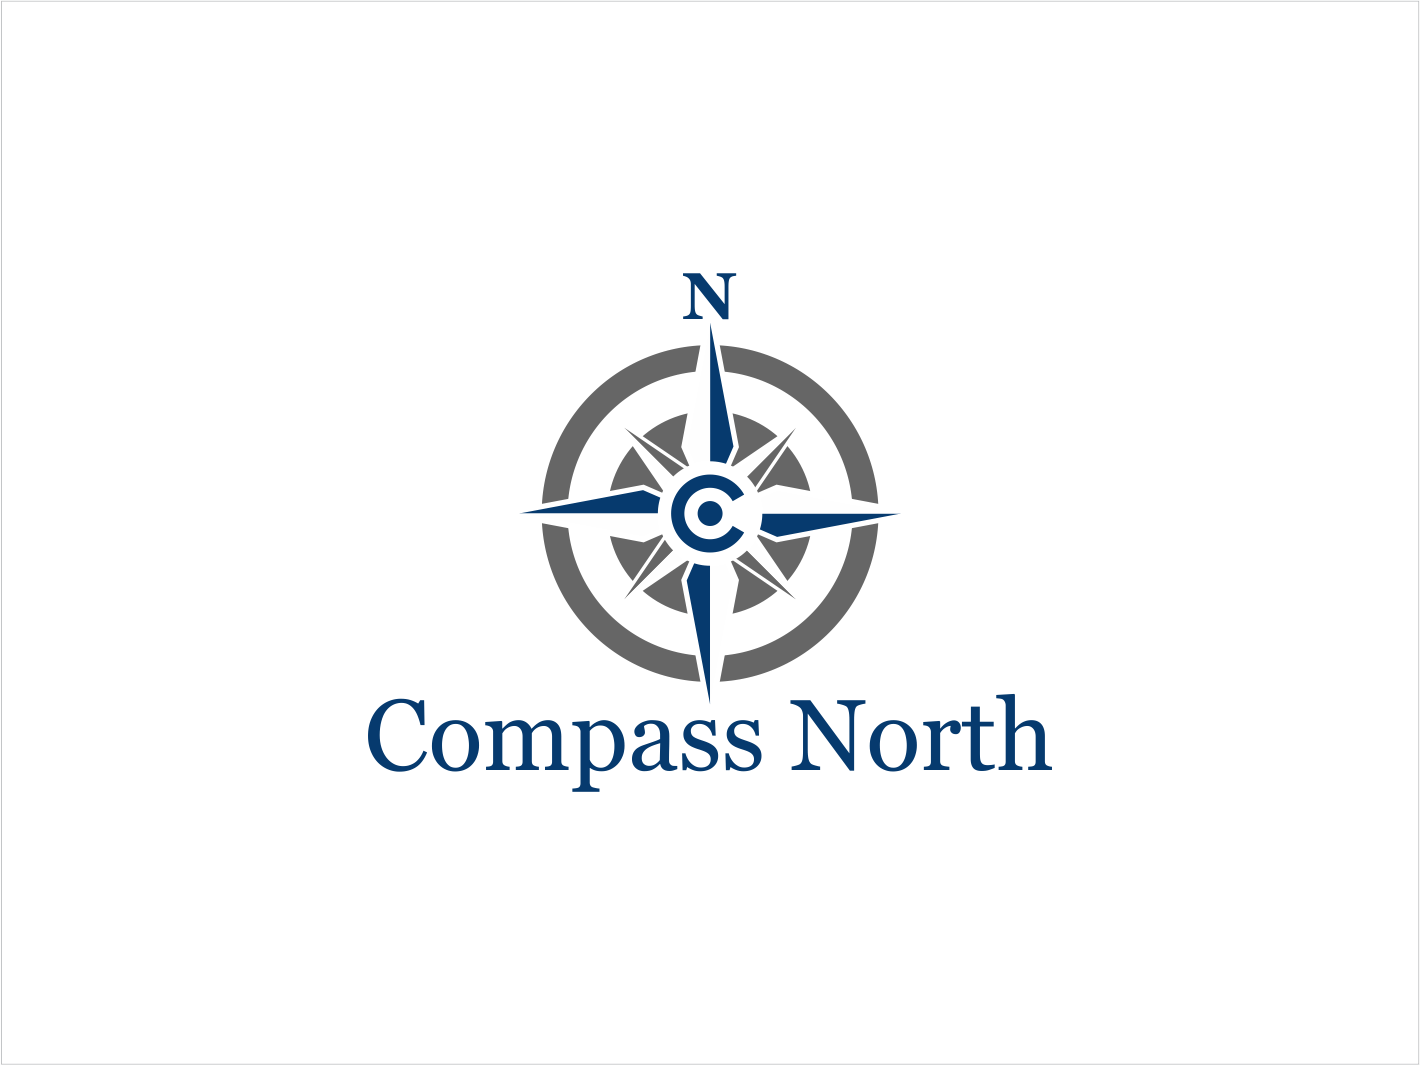 Compass North Logo - Modern, Professional, Business Consultant Logo Design for Compass